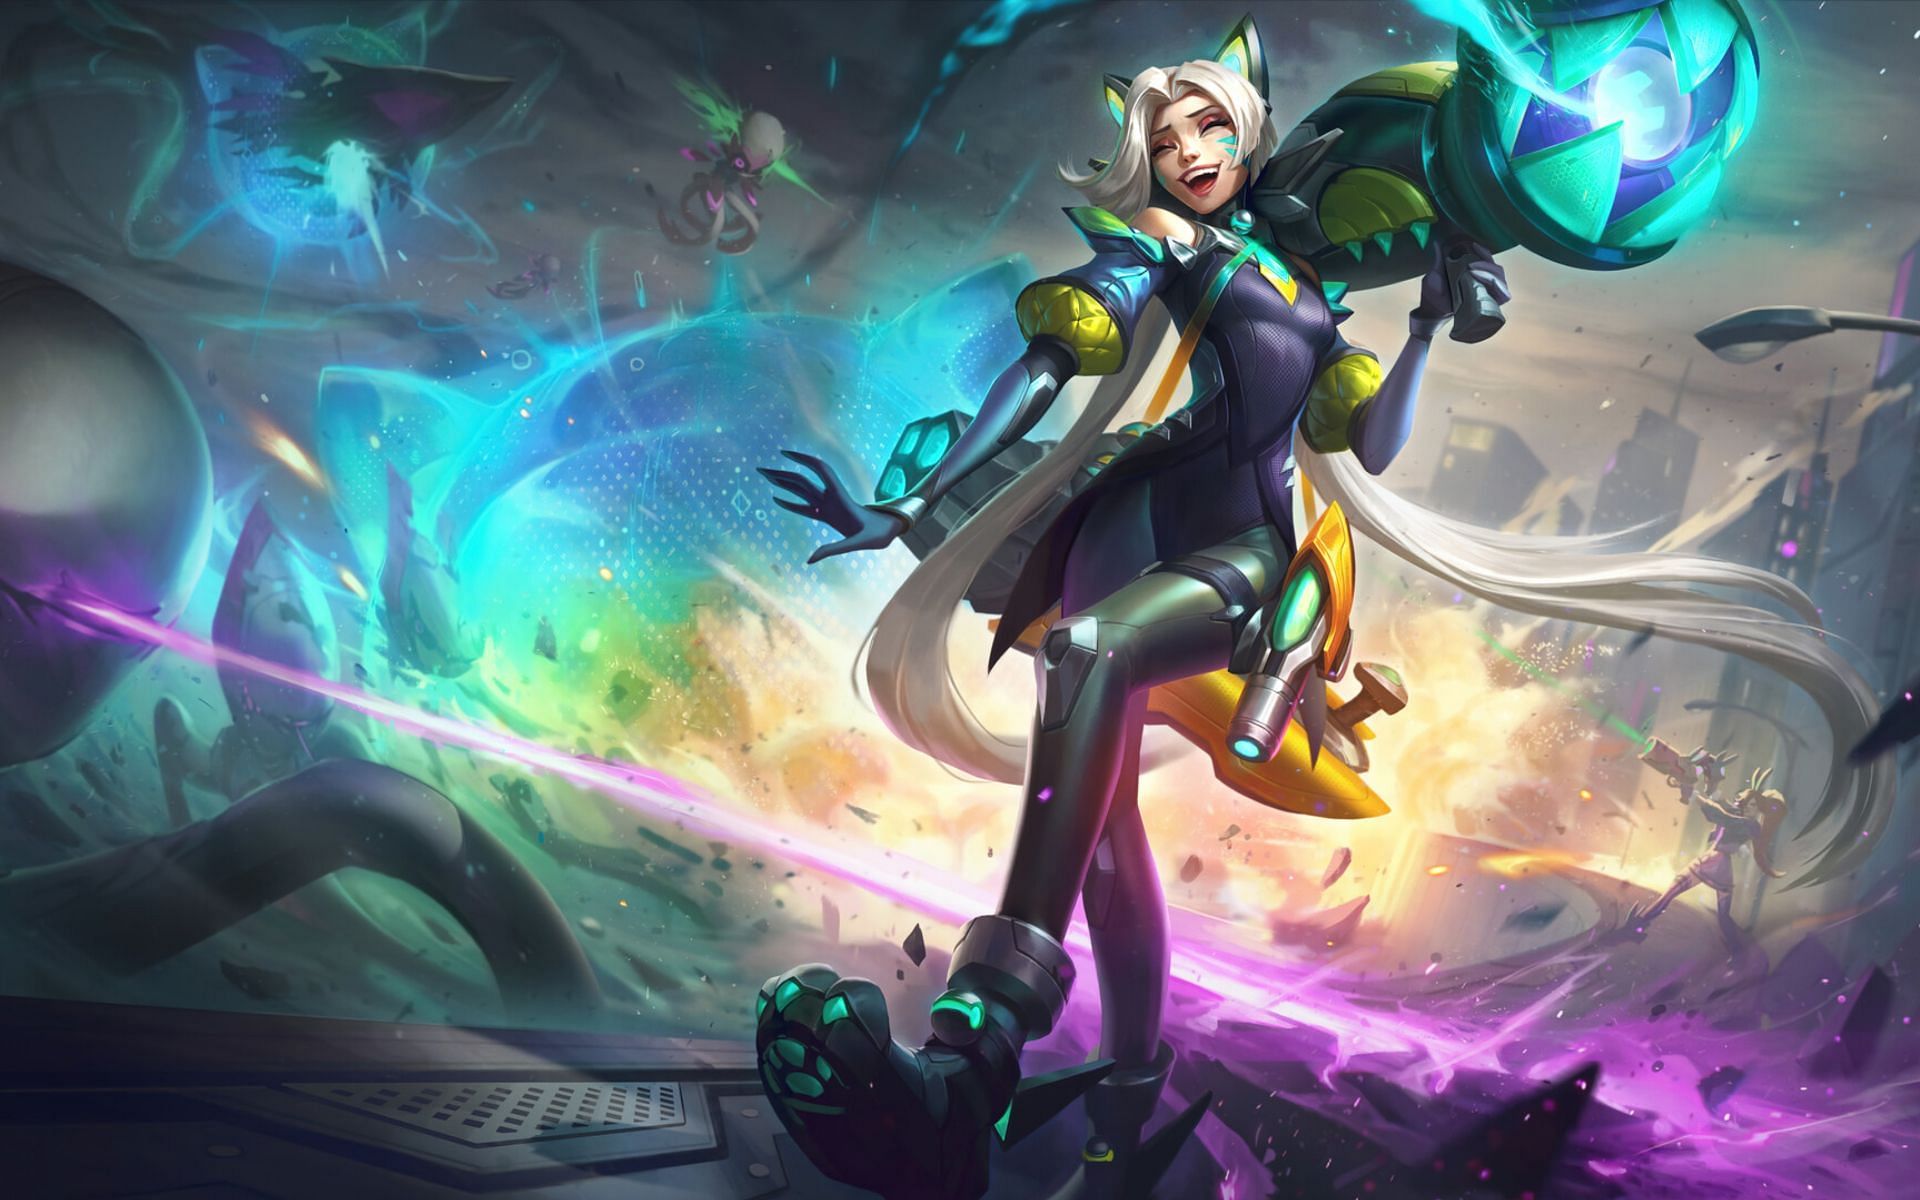 JInx is set to receive substantial buffs in the upcoming League of Legends patch 13.5 (Image via Riot Games)